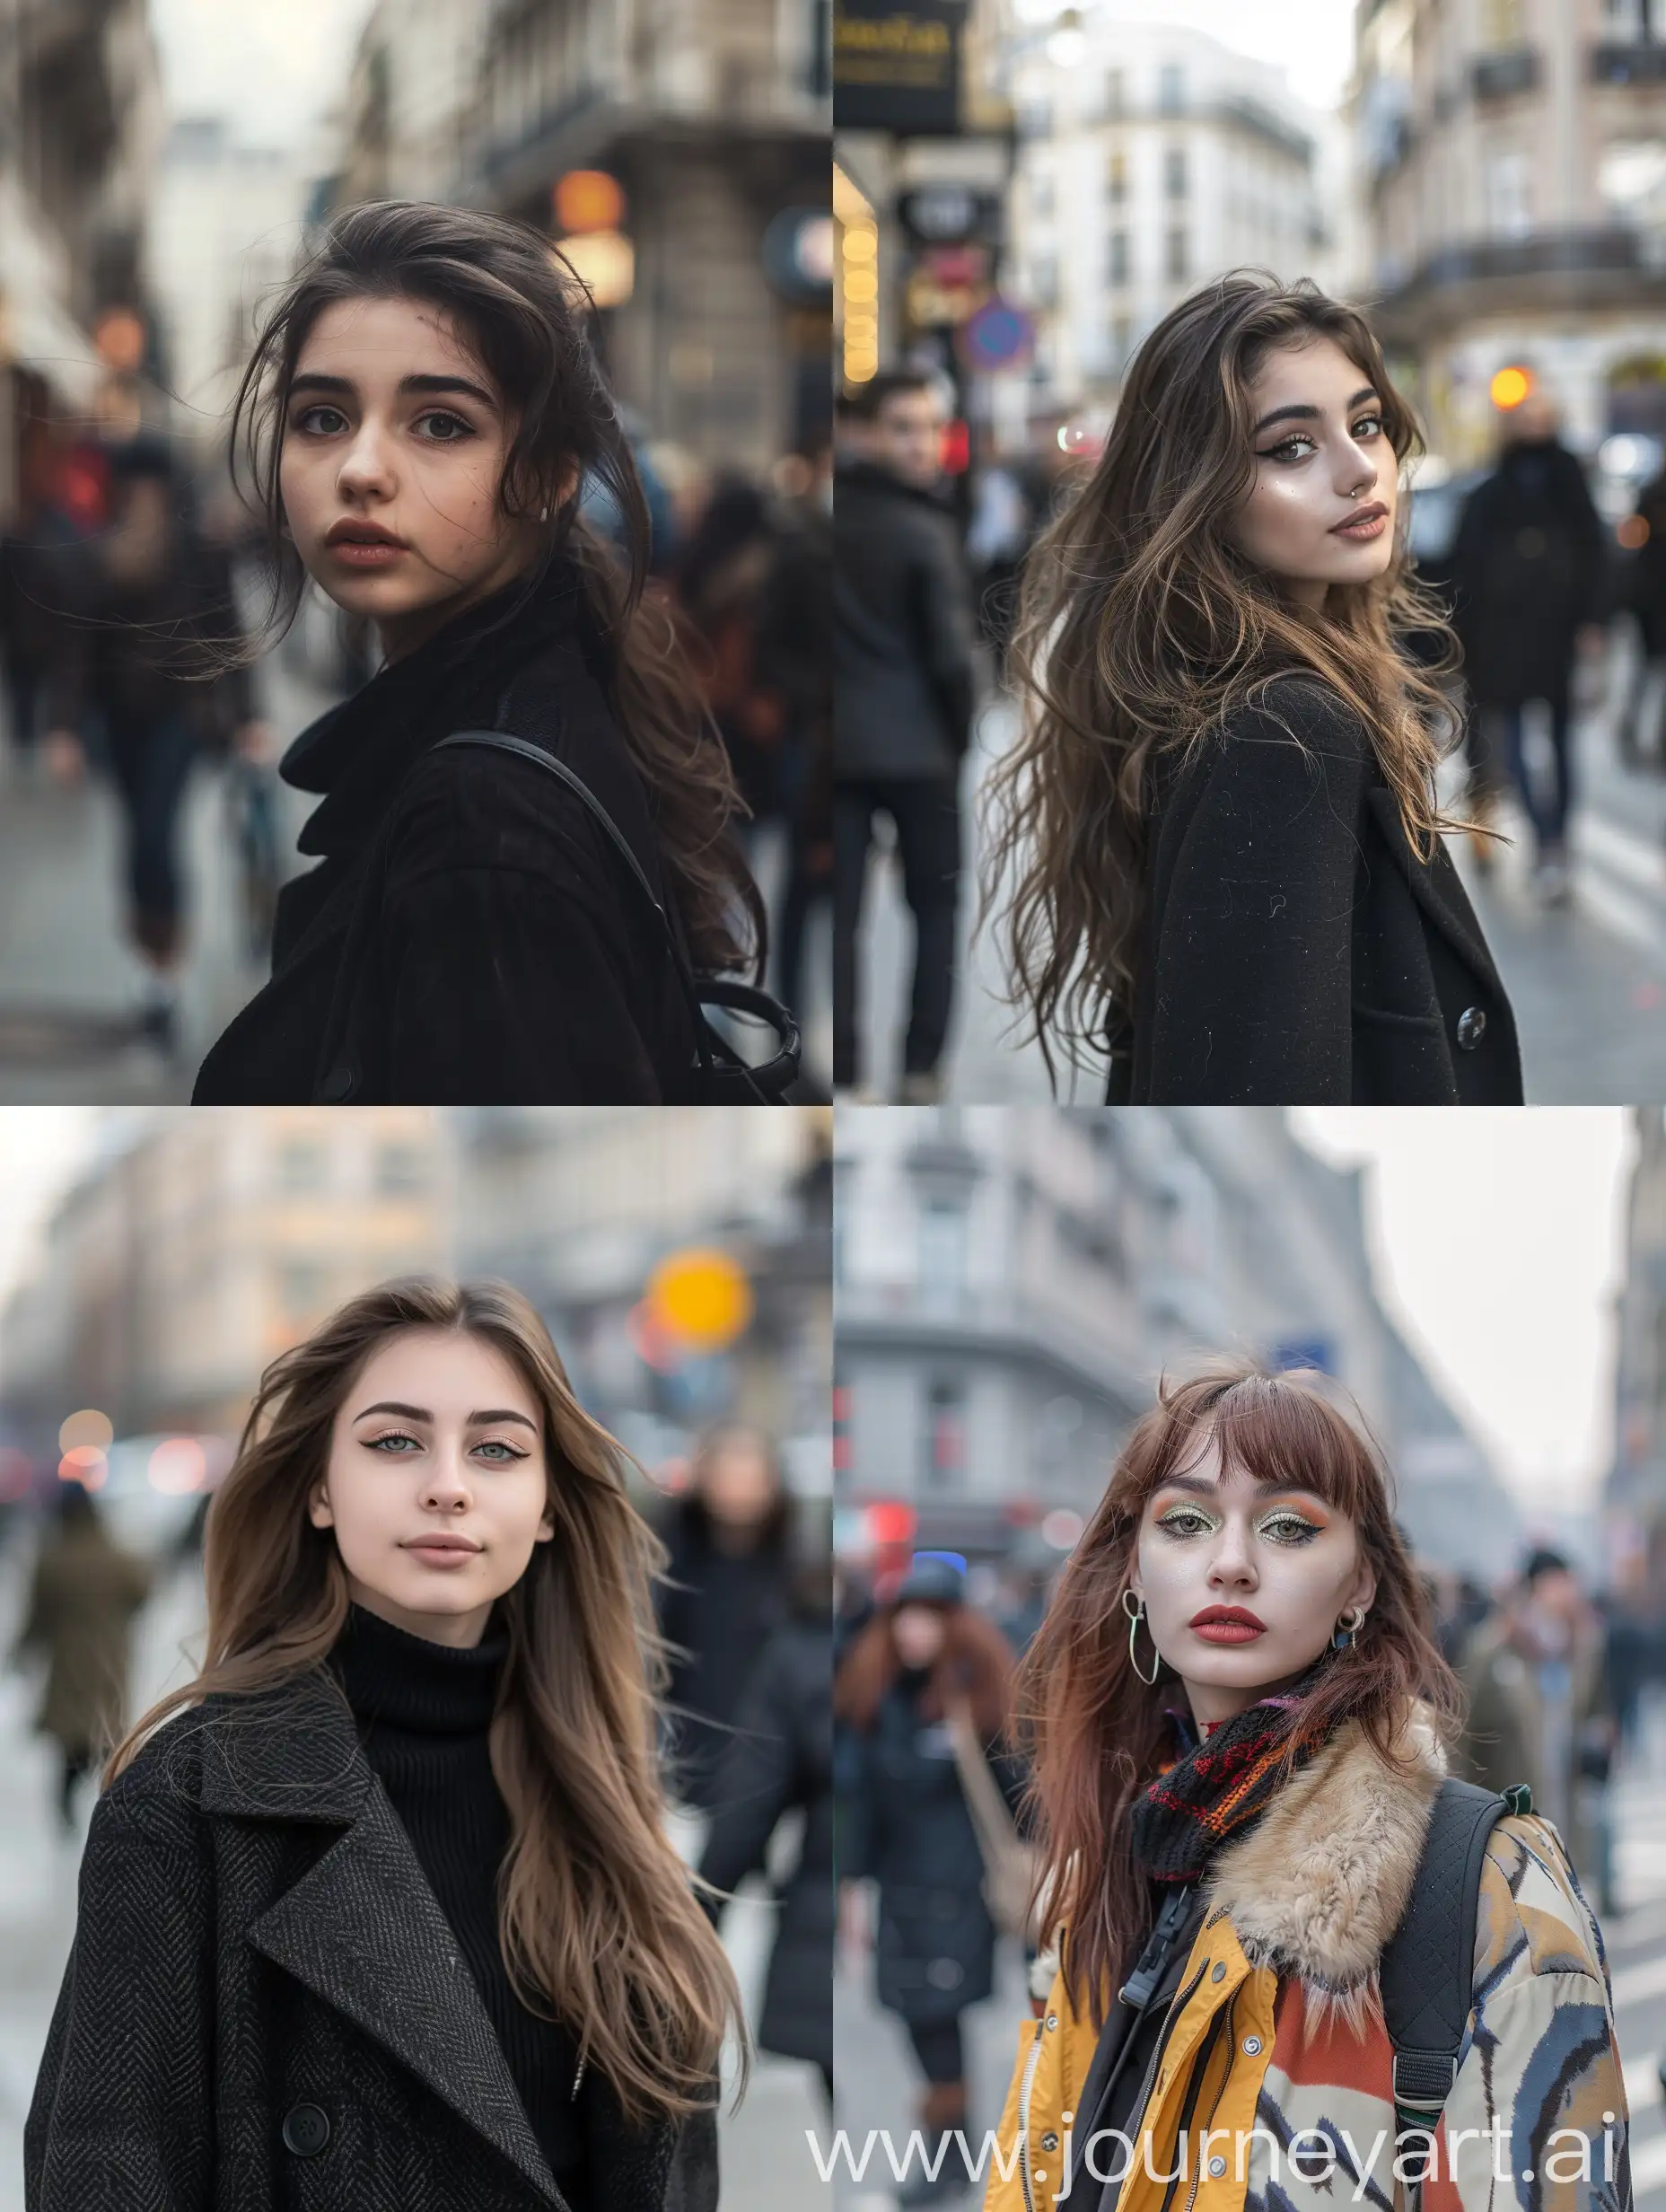 Beautiful-Girl-Portrait-on-Urban-Street-with-Passersby